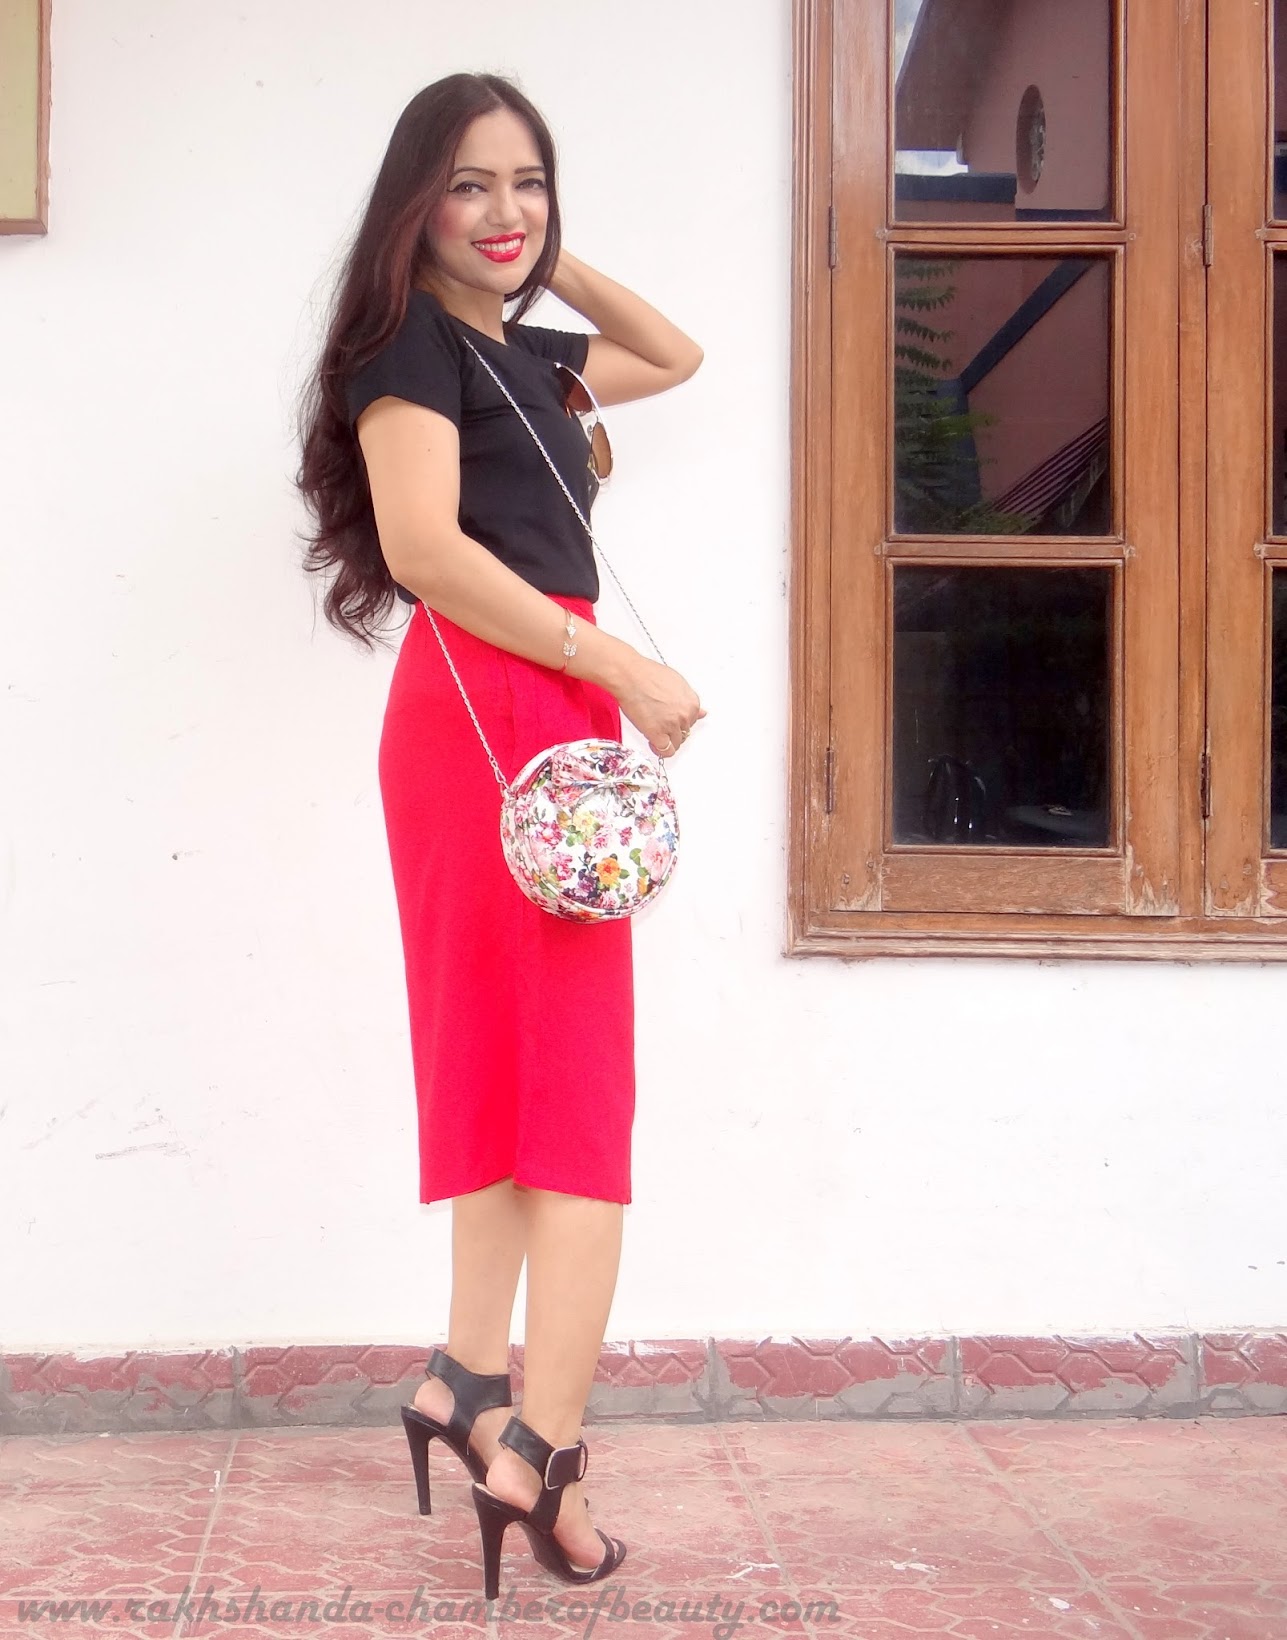 Culottes again- OOTD | 5 style tips to wear Culottes, how to wear culottes, fashion trends 2015, Stalkbuylove, floral bag from SBL, Indian fashion blogger, Chamber of Beauty